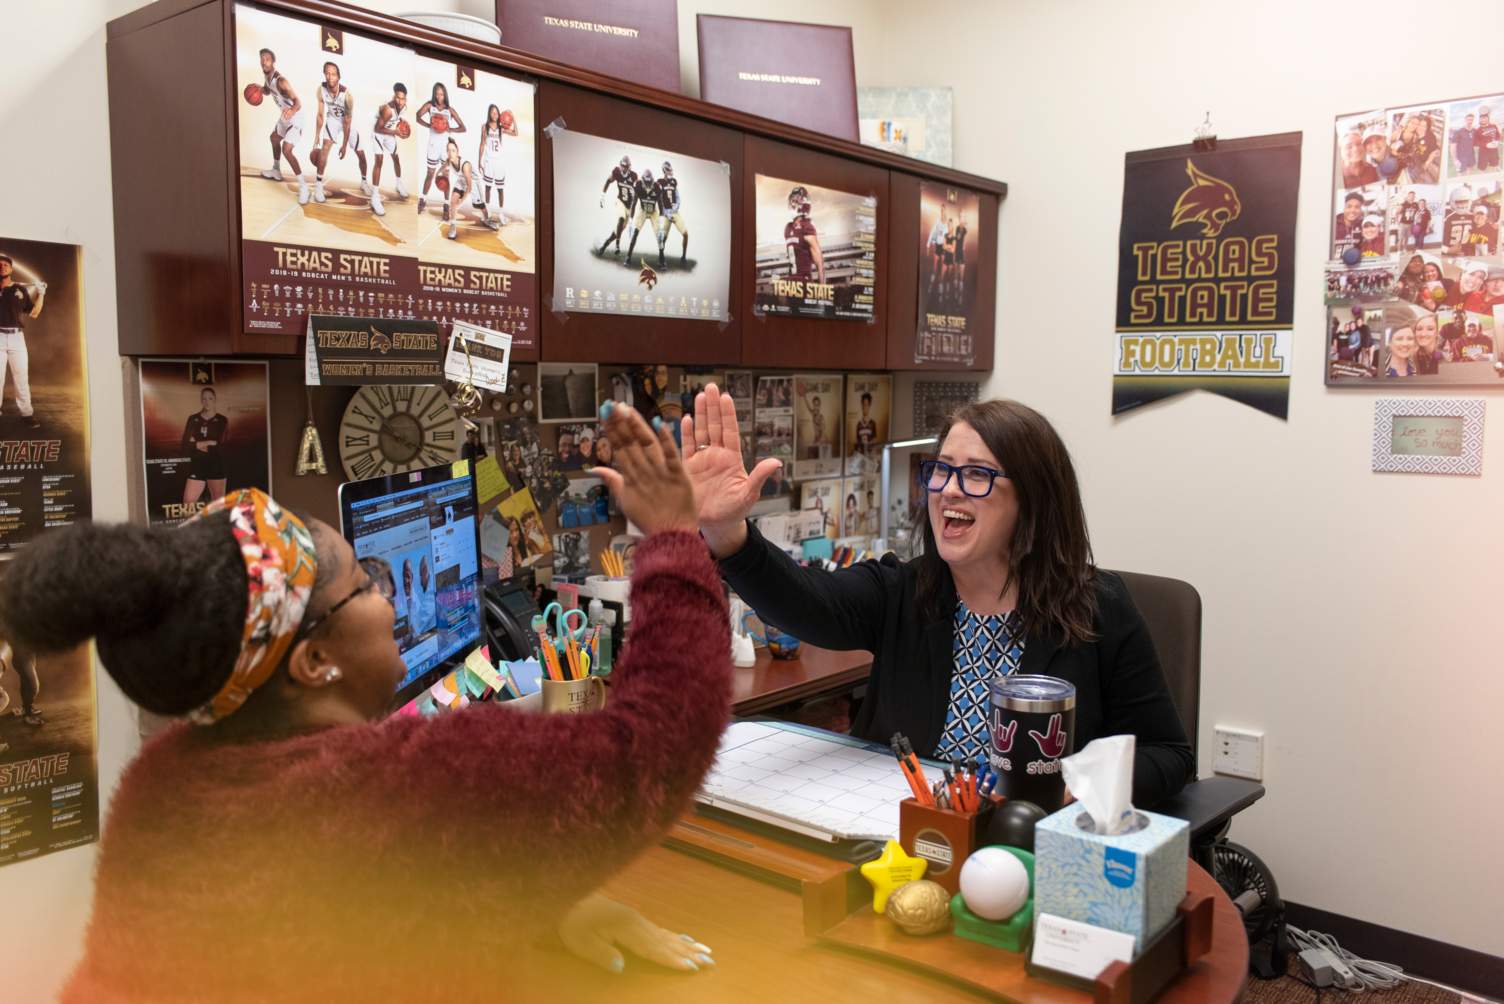 Two women in an office high-fiving. Lots of Texas State memorabilia on the walls. 